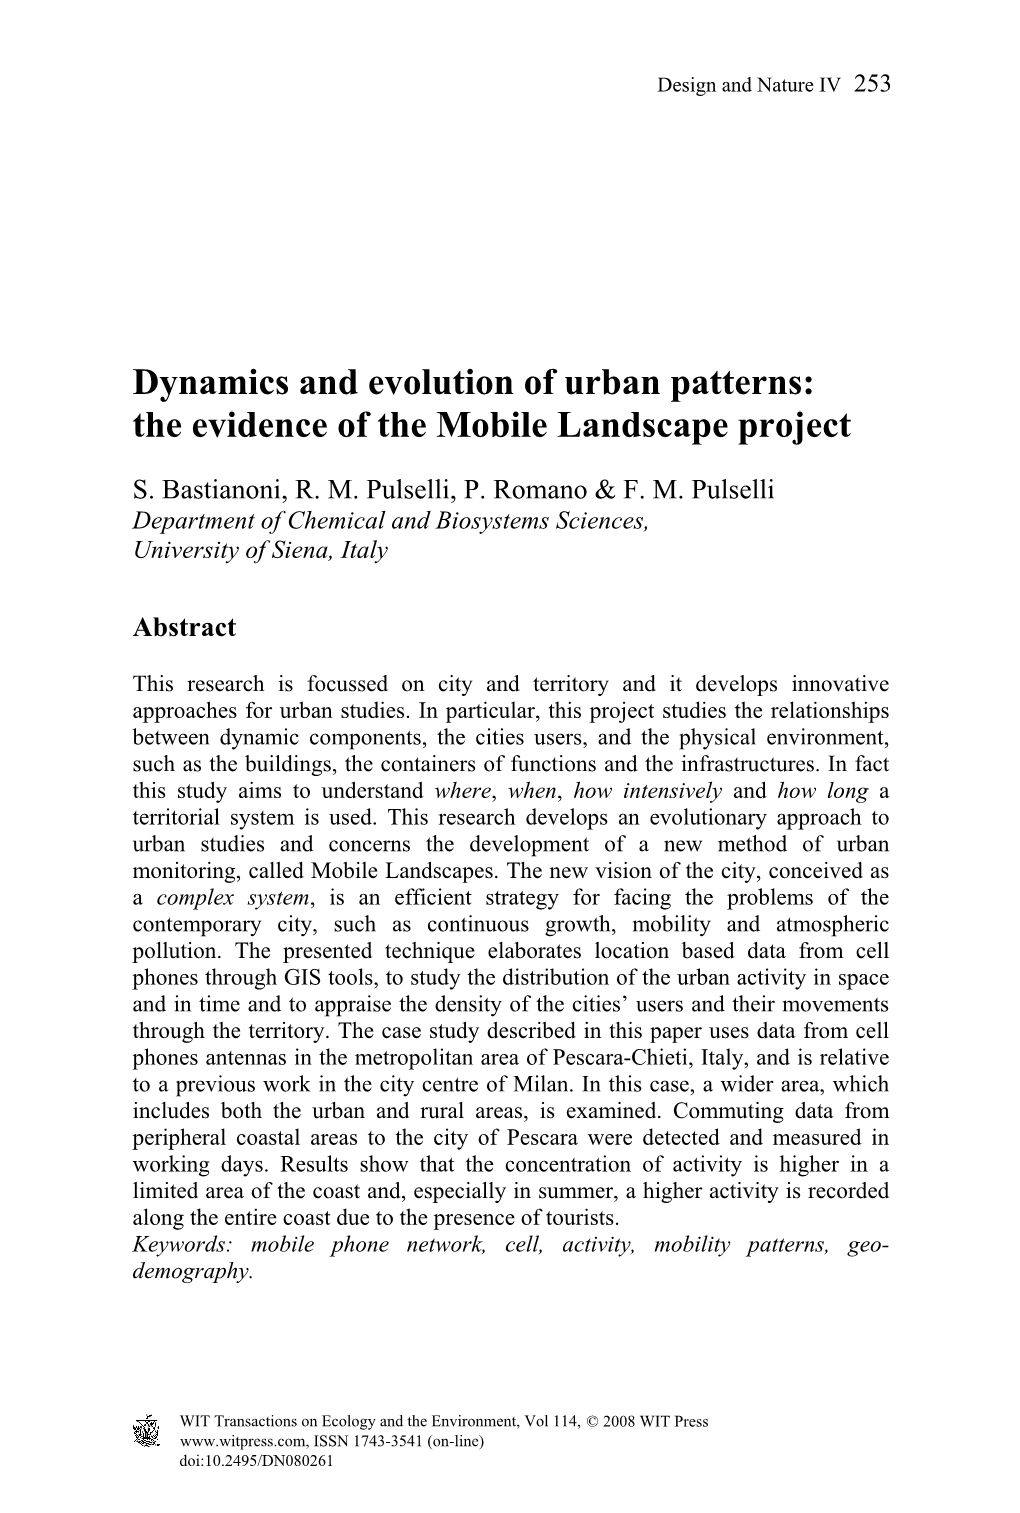 The Evidence of the Mobile Landscape Project